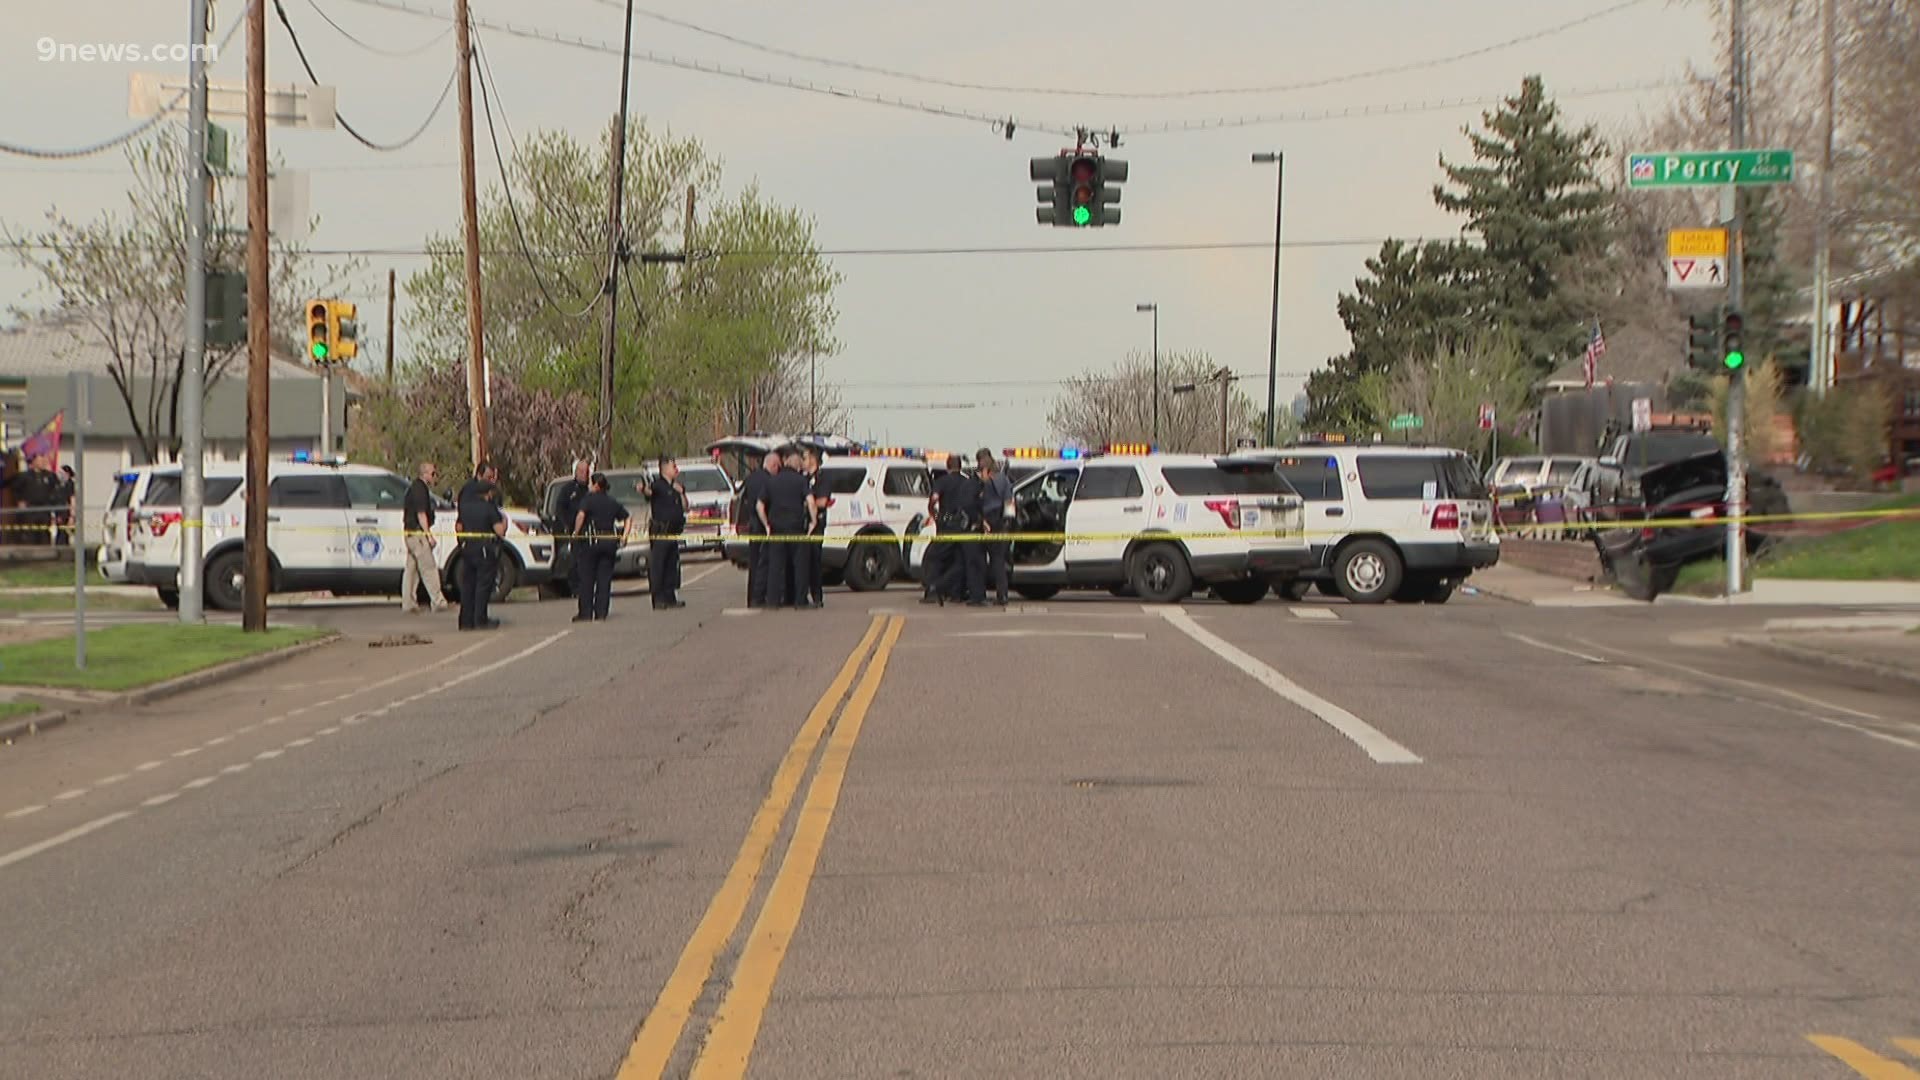 The shooting happened near West 1st Avenue and Perry Street in Denver's Barnum neighborhood.